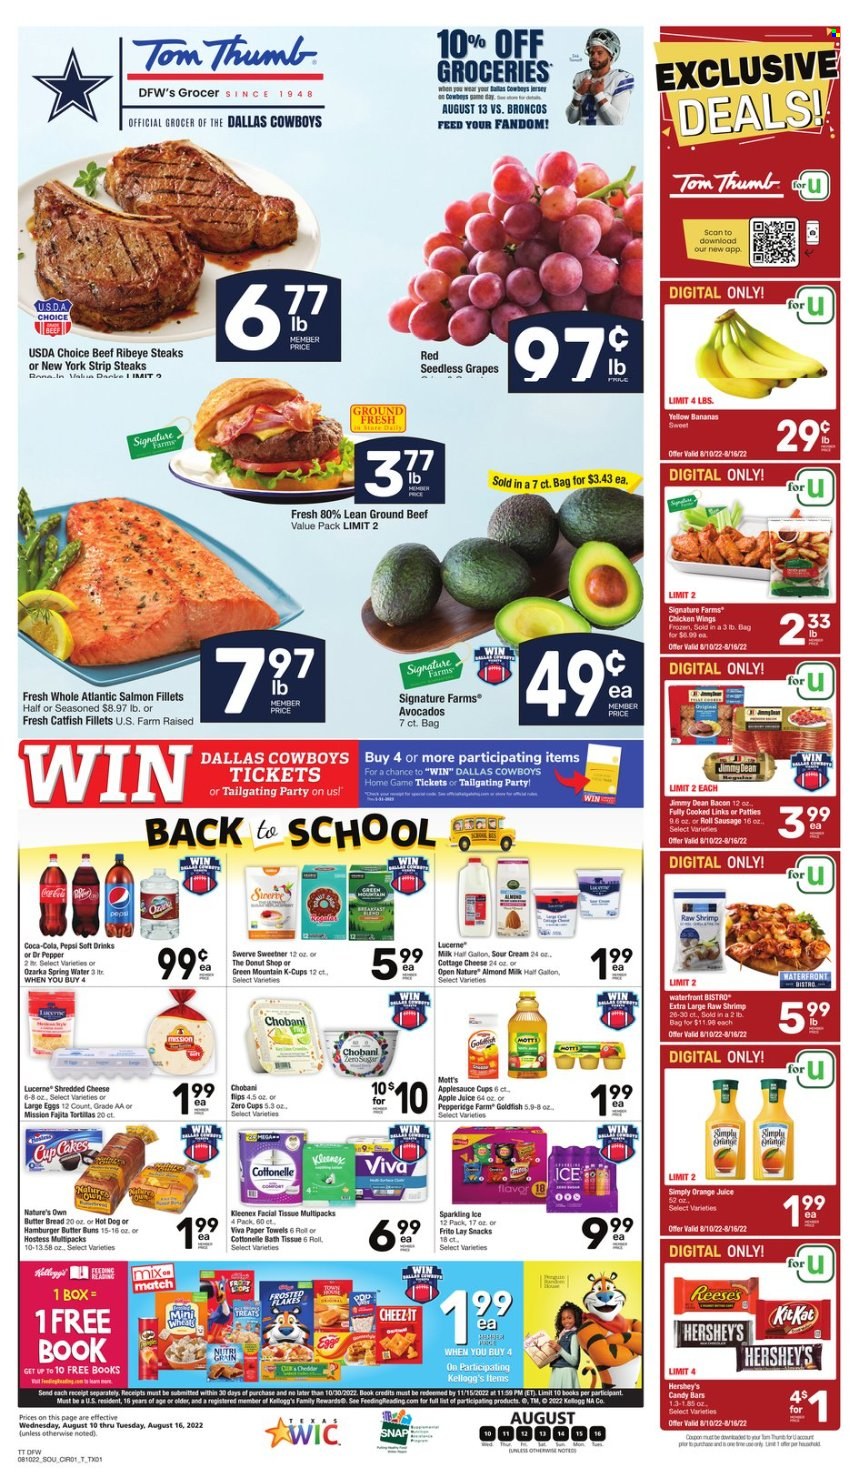 thumbnail - Tom Thumb Flyer - 08/10/2022 - 08/16/2022 - Sales products - bread, tortillas, buns, avocado, bananas, grapes, seedless grapes, Mott's, catfish, salmon, salmon fillet, shrimps, hot dog, hamburger, fajita, Rana, Jimmy Dean, bacon, sausage, cottage cheese, shredded cheese, Chobani, almond milk, milk, large eggs, sour cream, Reese's, Hershey's, chicken wings, snack, KitKat, Kellogg's, Goldfish, Frosted Flakes, apple sauce, apple juice, Coca-Cola, Pepsi, orange juice, juice, Dr. Pepper, soft drink, spring water, coffee capsules, K-Cups, Green Mountain, beef meat, ground beef, steak, ribeye steak, striploin steak, bath tissue, Cottonelle, Kleenex, kitchen towels, paper towels. Page 1.